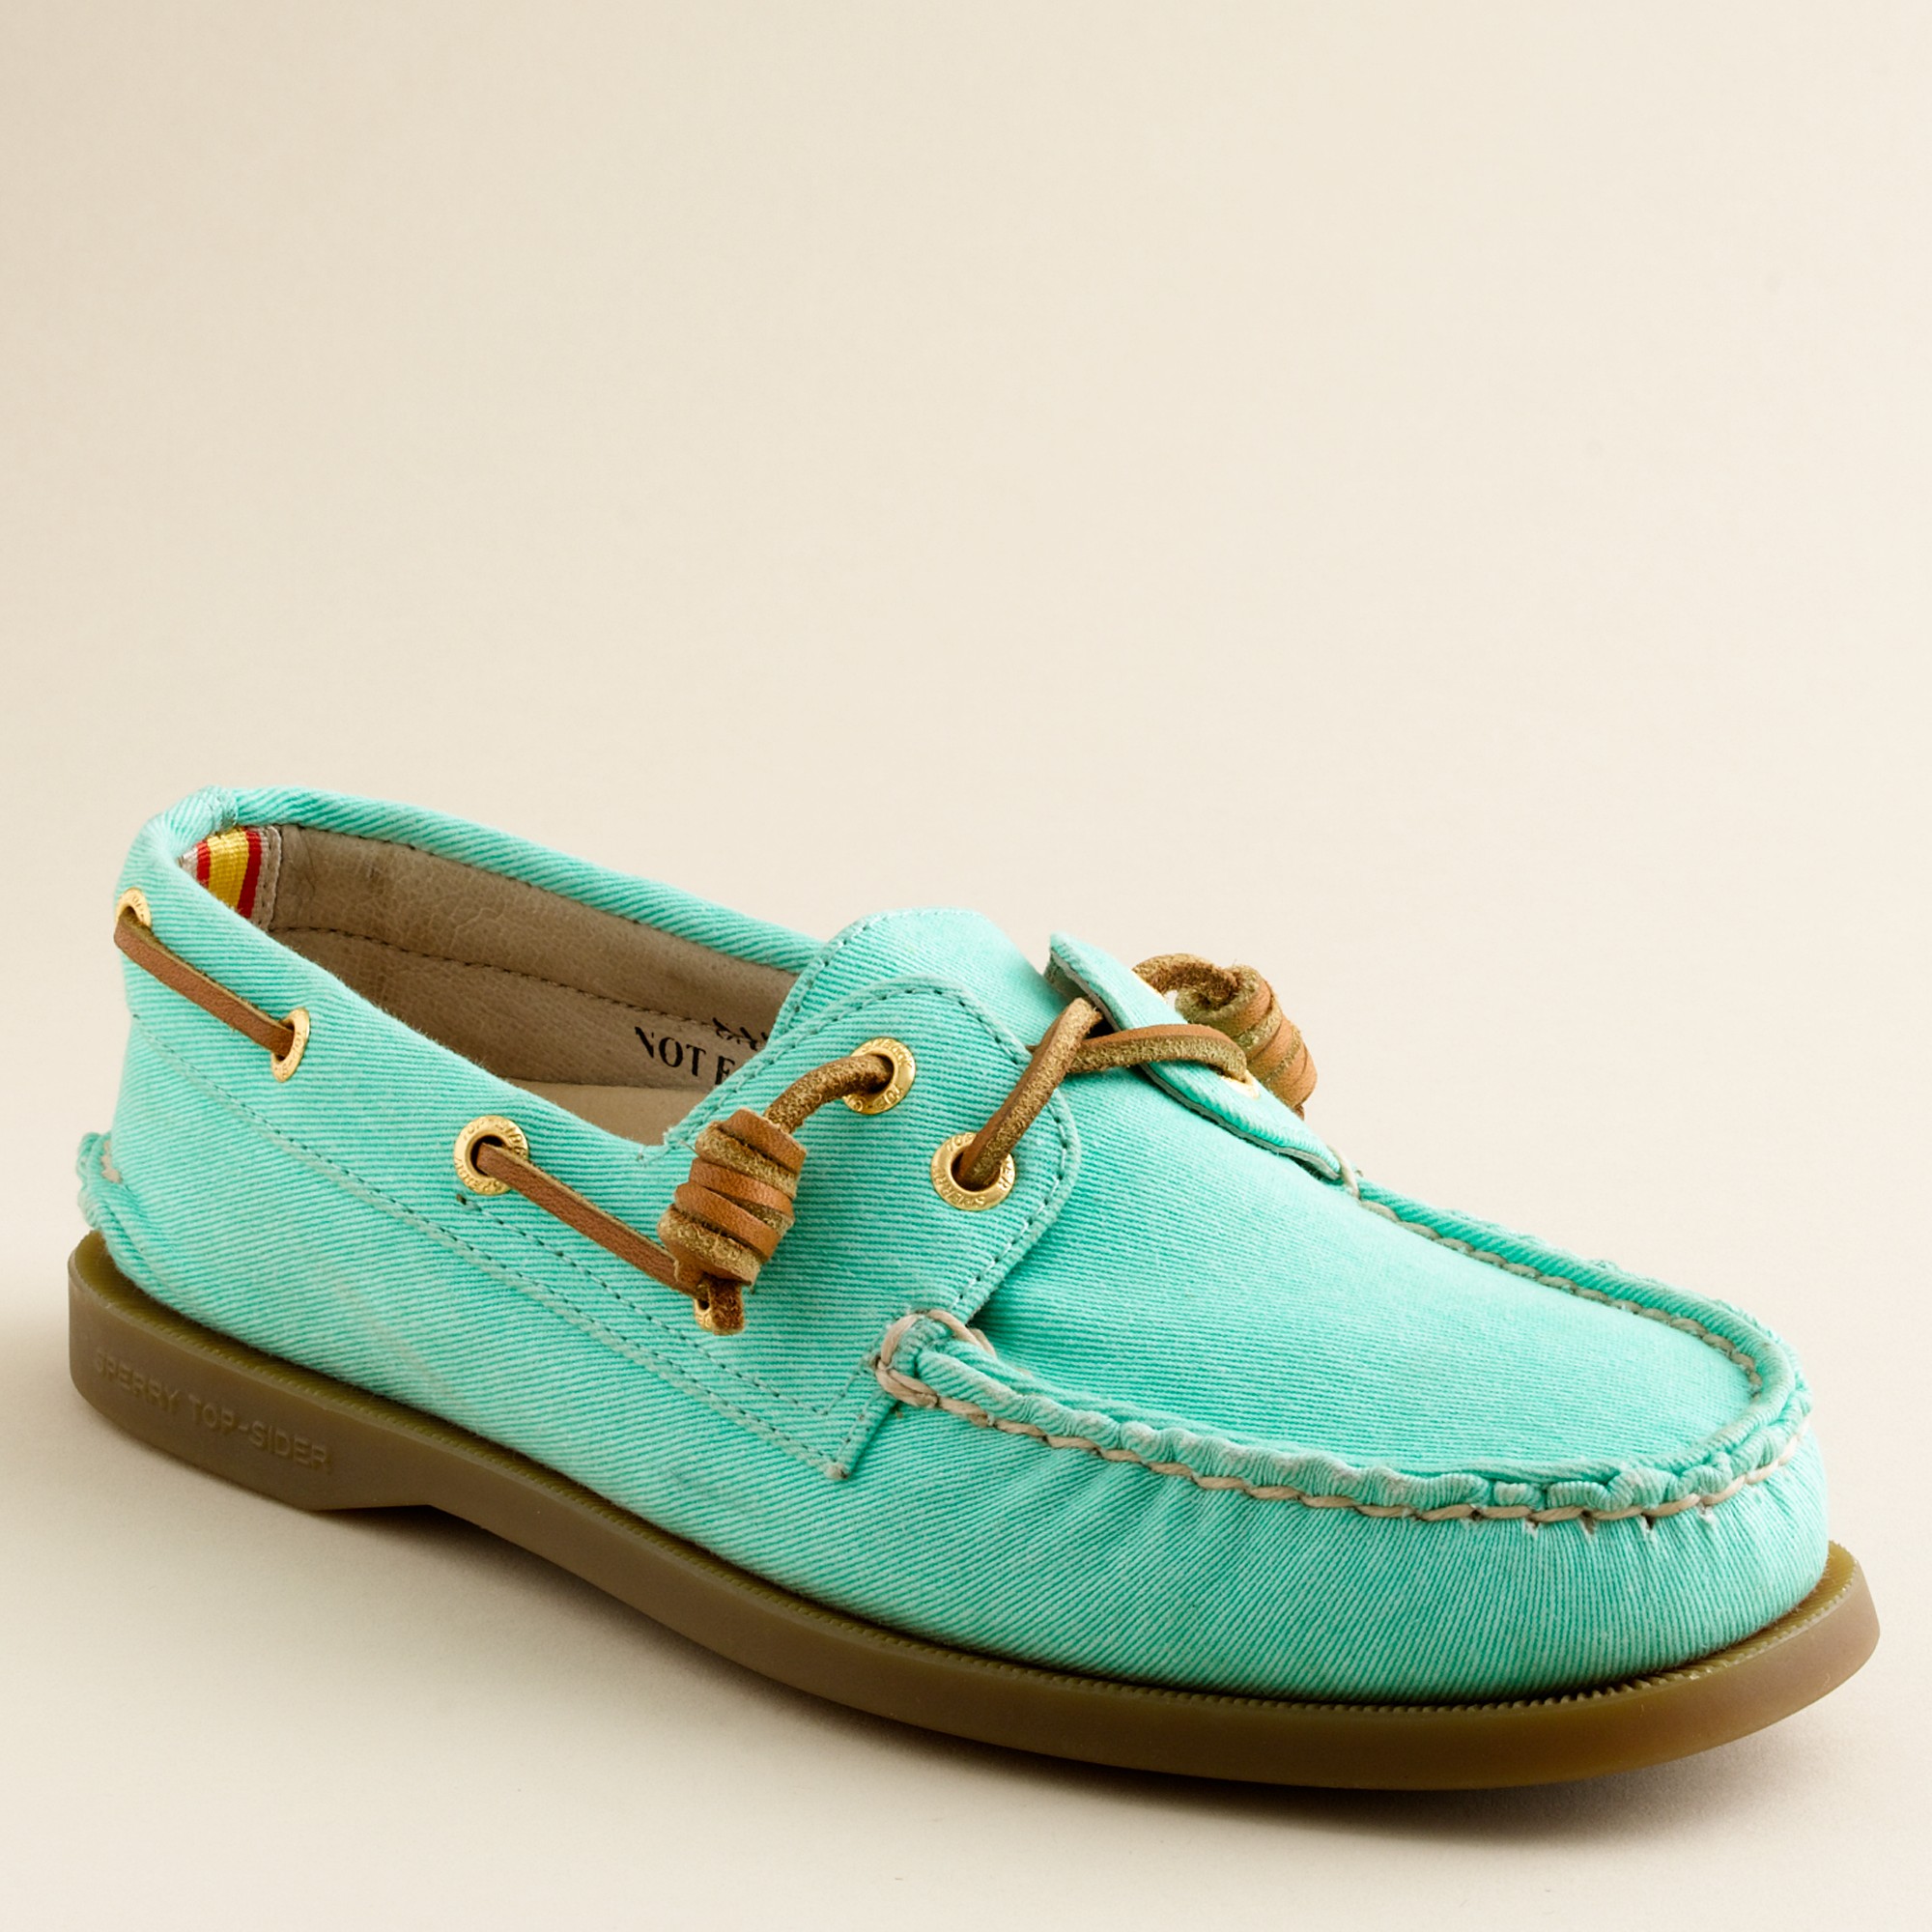 J.crew Sperry Top-Sider® Authentic Original 2-Eye Boat Shoes in Twill ...